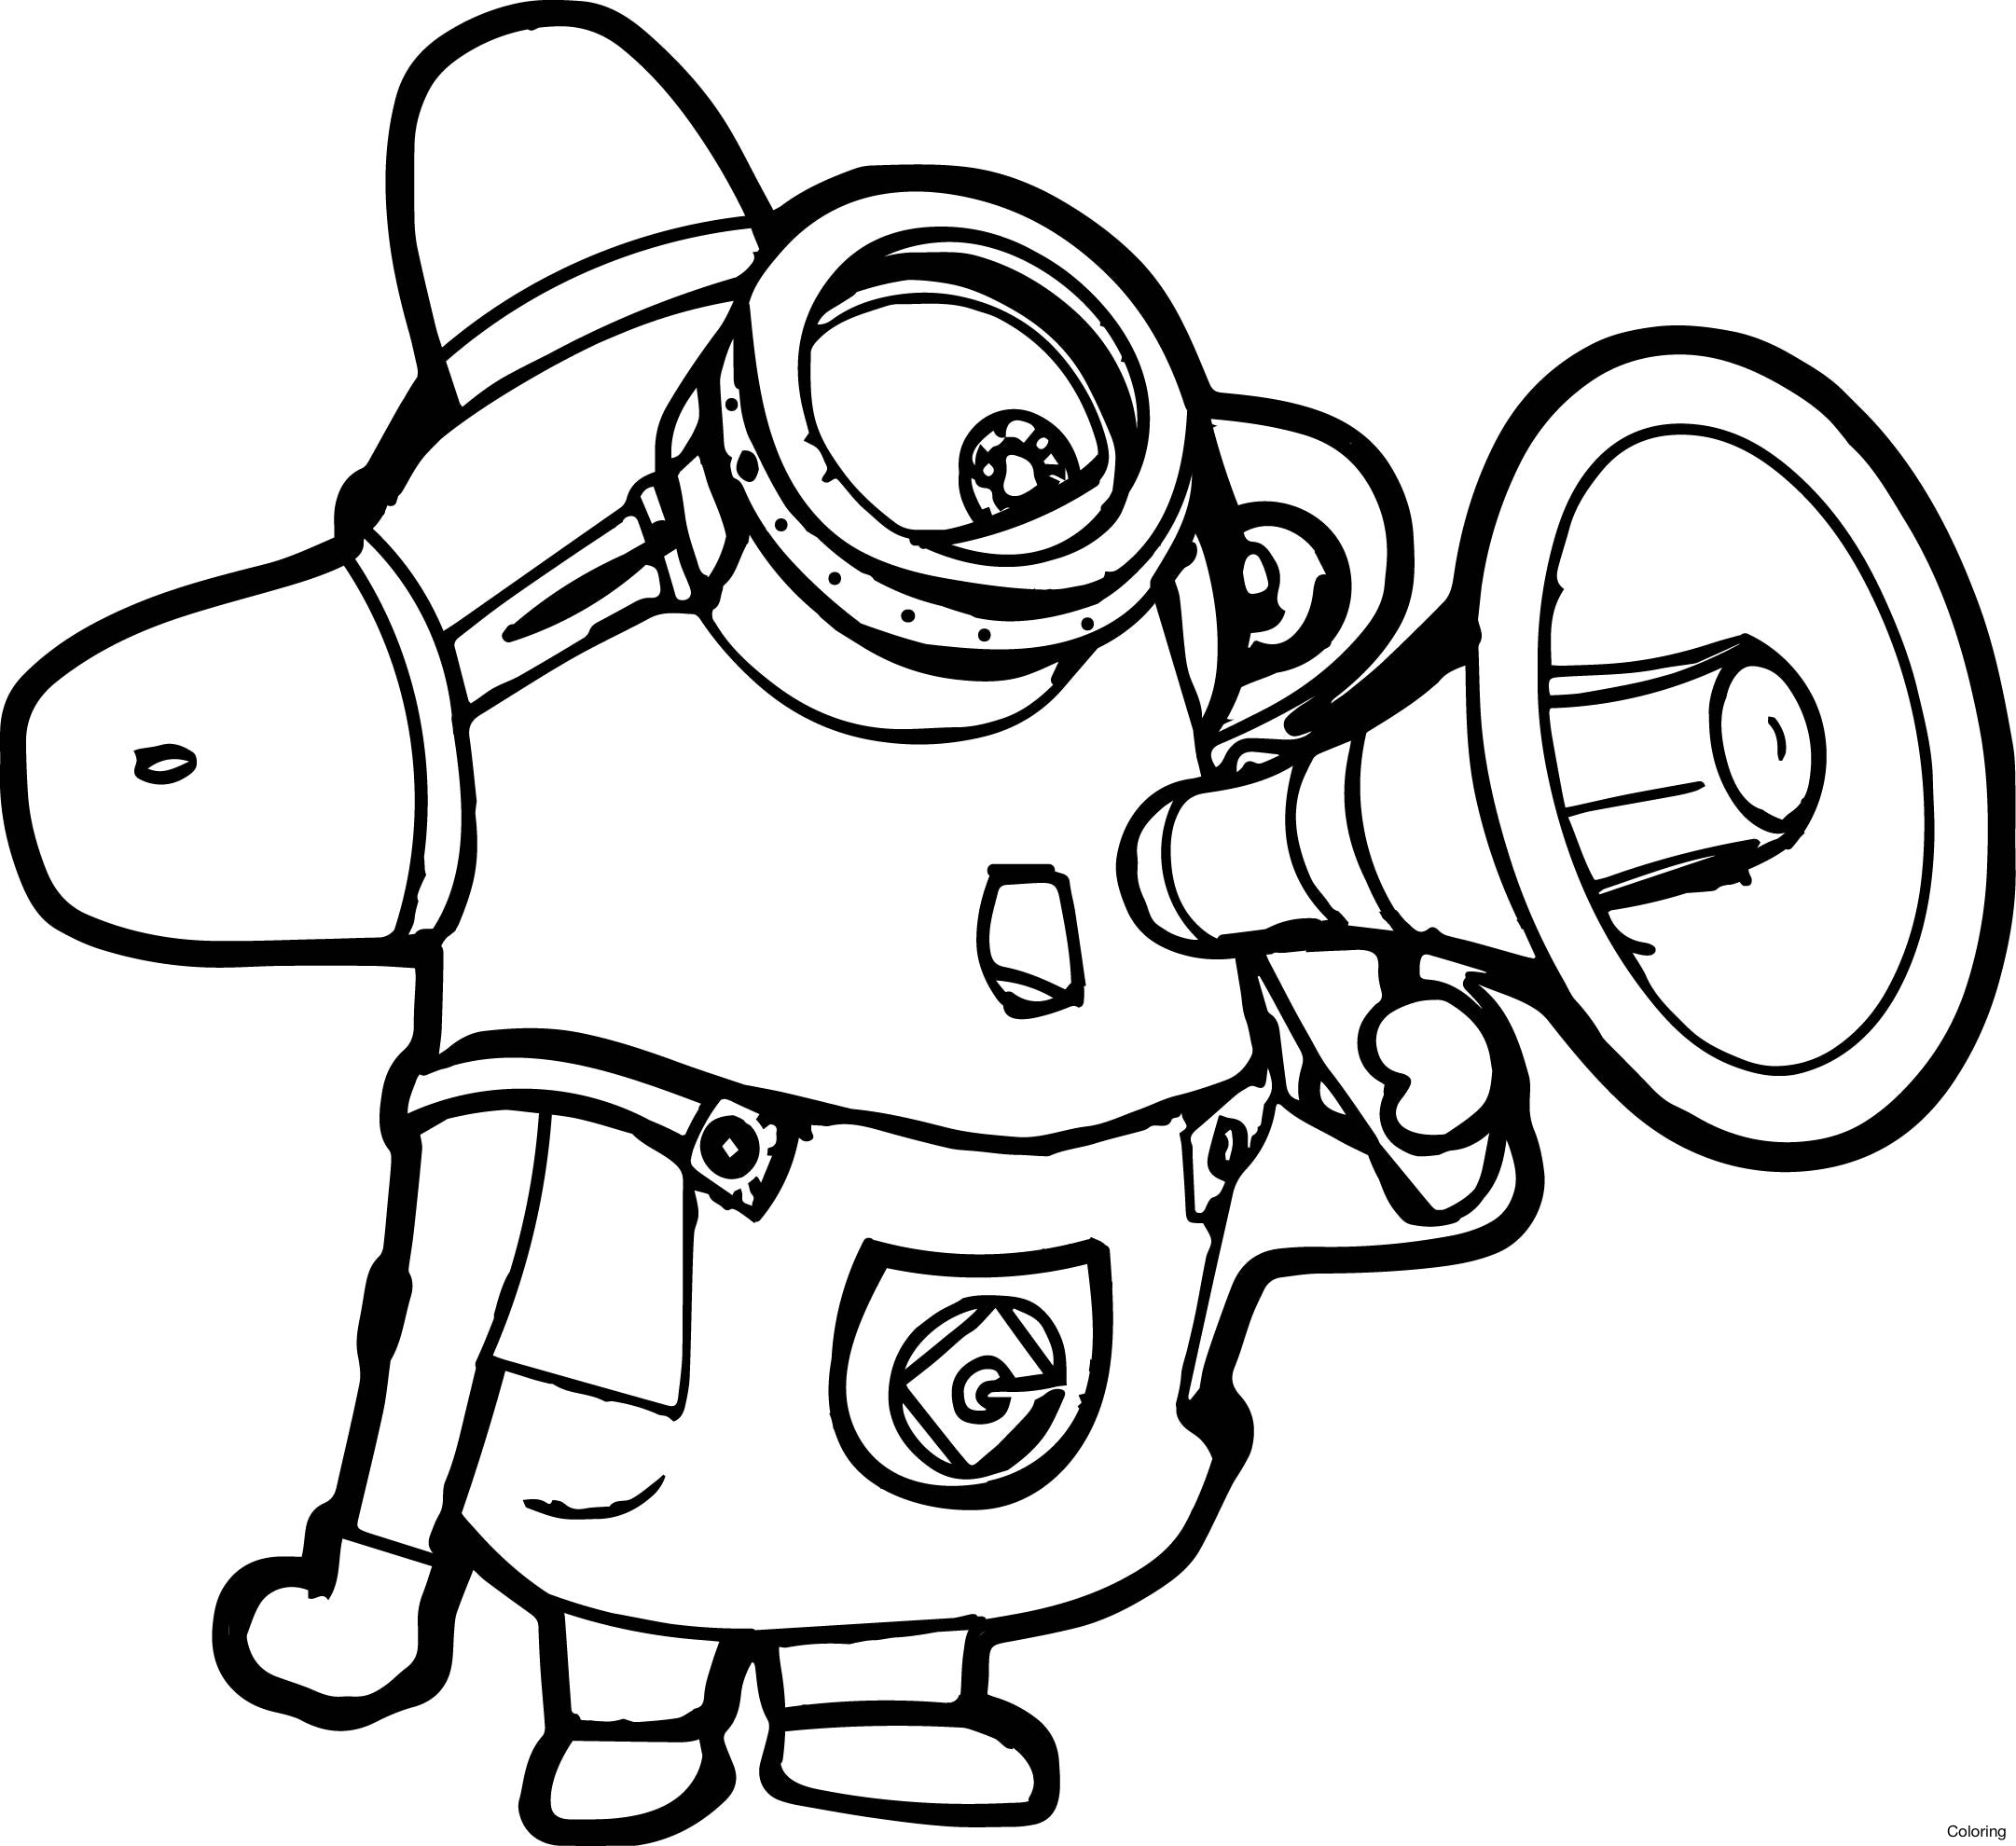 minion-coloring-pages-kevin-at-getcolorings-free-printable